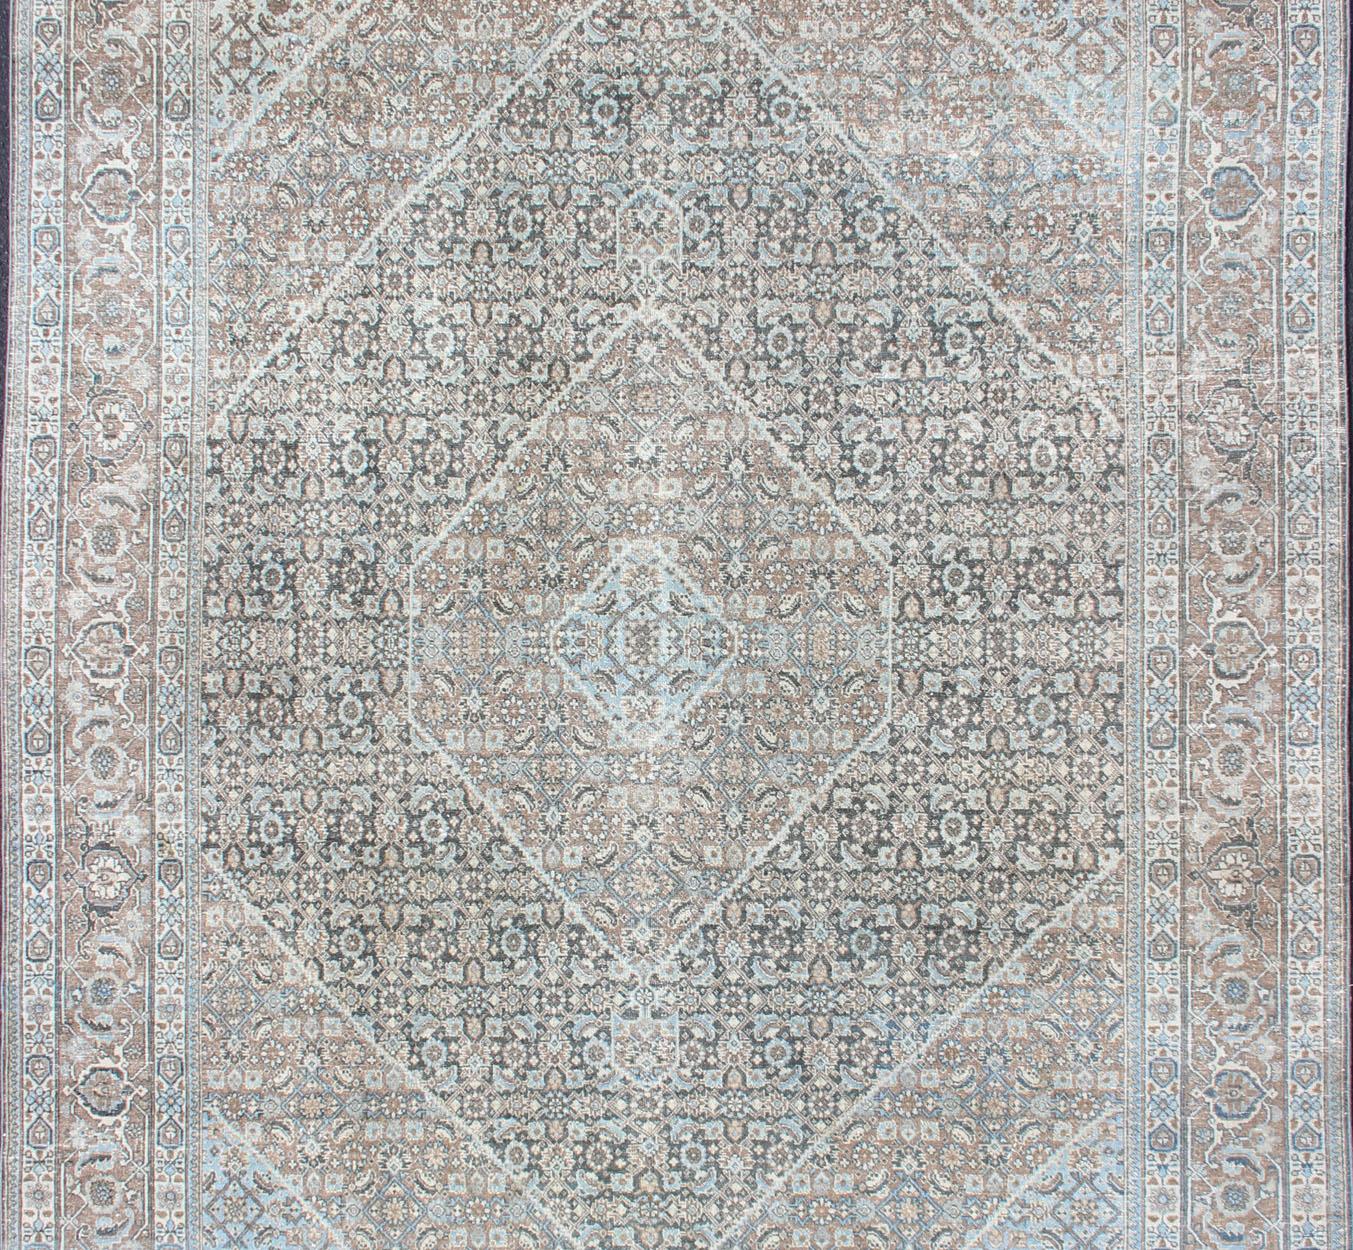 Tan background Persian Tabriz rug with free flowing floral design, rug R20-0603, country of origin / type: Iran / Tabriz, circa 1930.

This magnificent 20th century Persian Tabriz rug bears a beautiful, all-over sub-geometric floral design paired